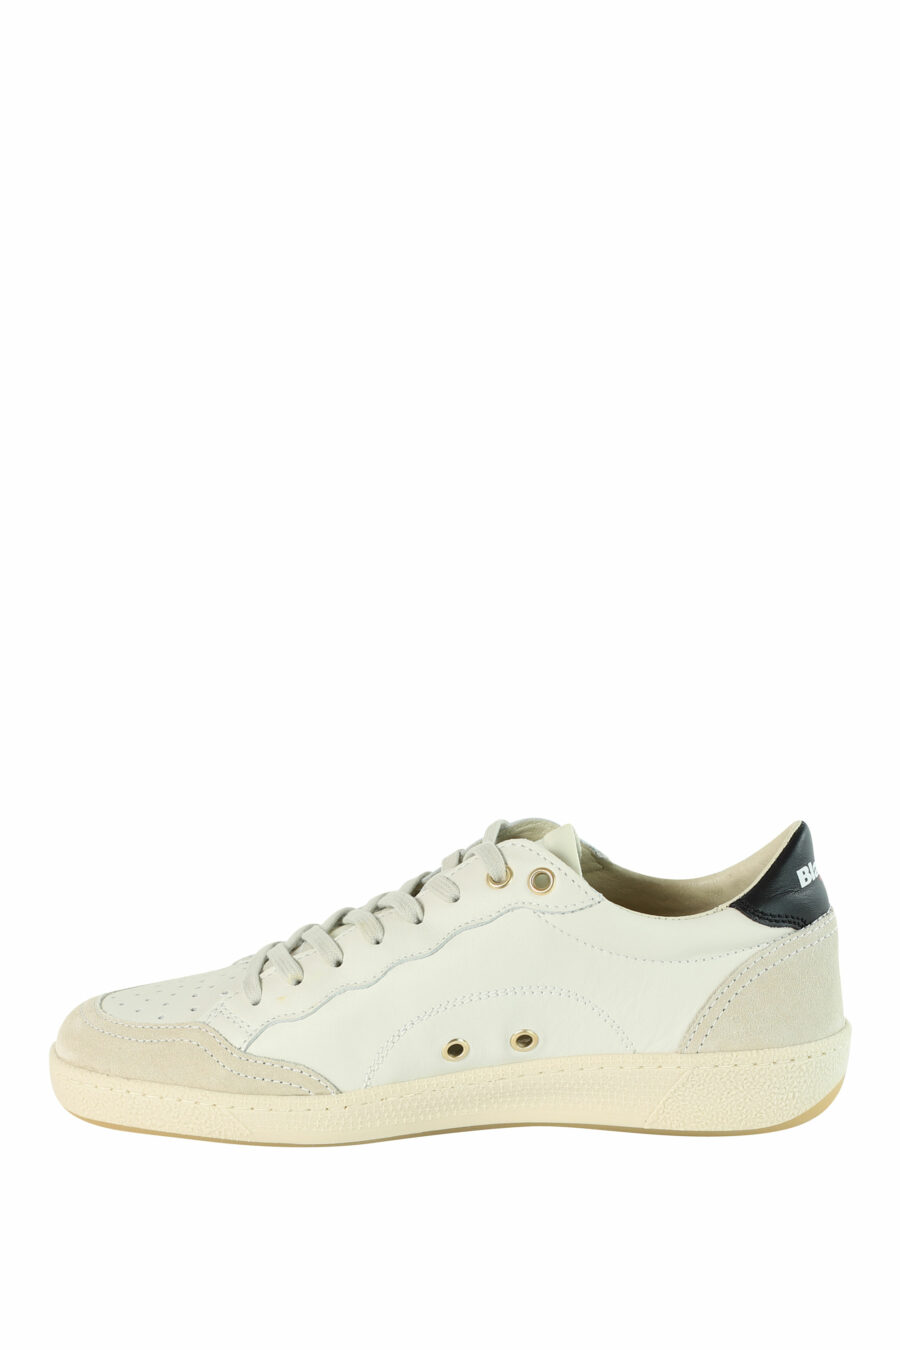 White "MURRAY" trainers with black details - 8058156497504 3